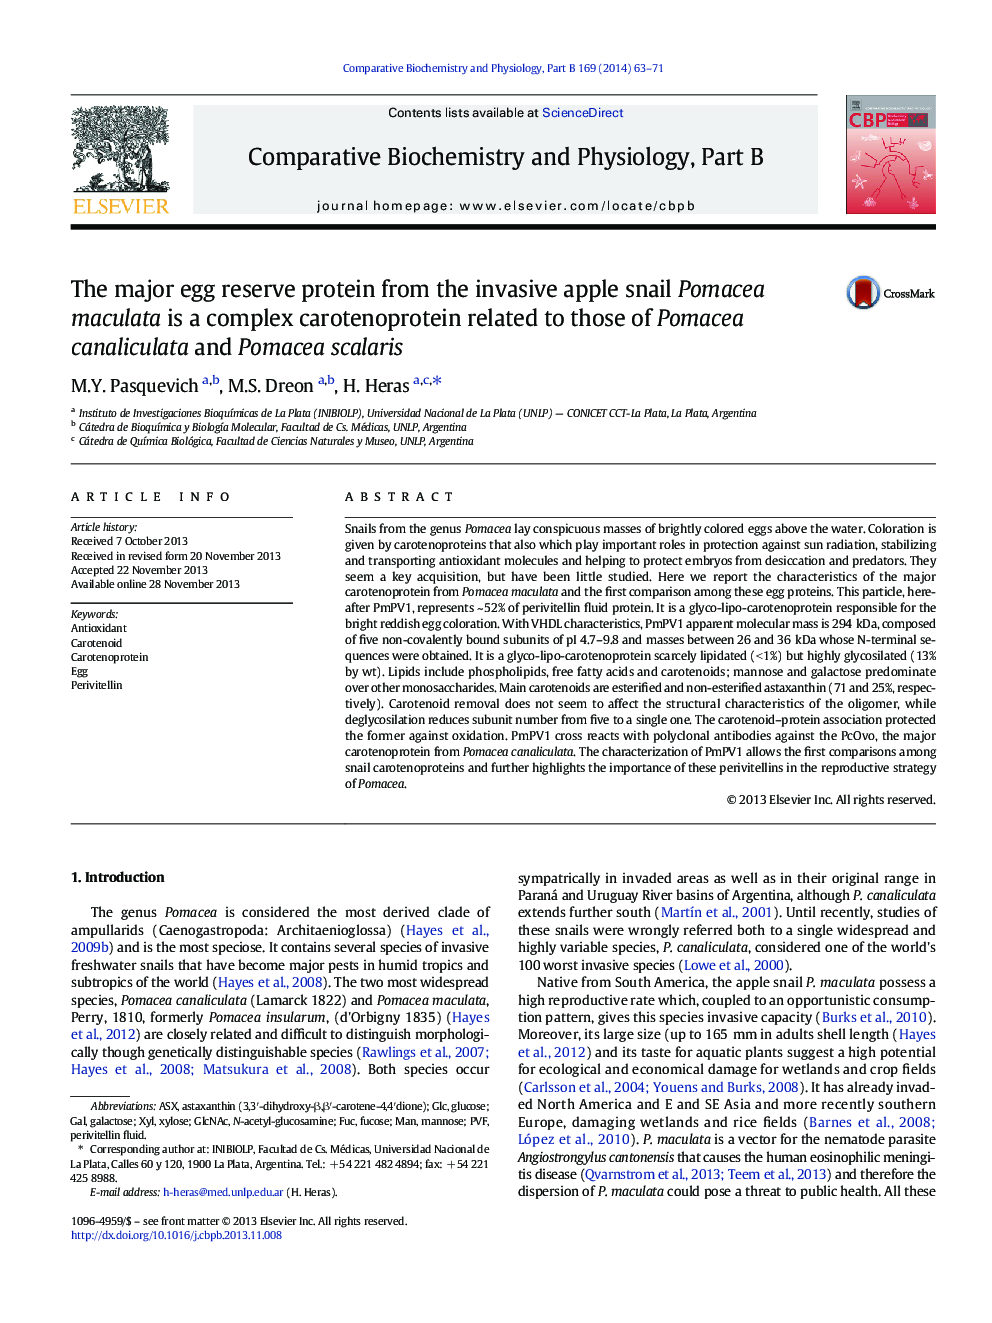 The major egg reserve protein from the invasive apple snail Pomacea maculata is a complex carotenoprotein related to those of Pomacea canaliculata and Pomacea scalaris